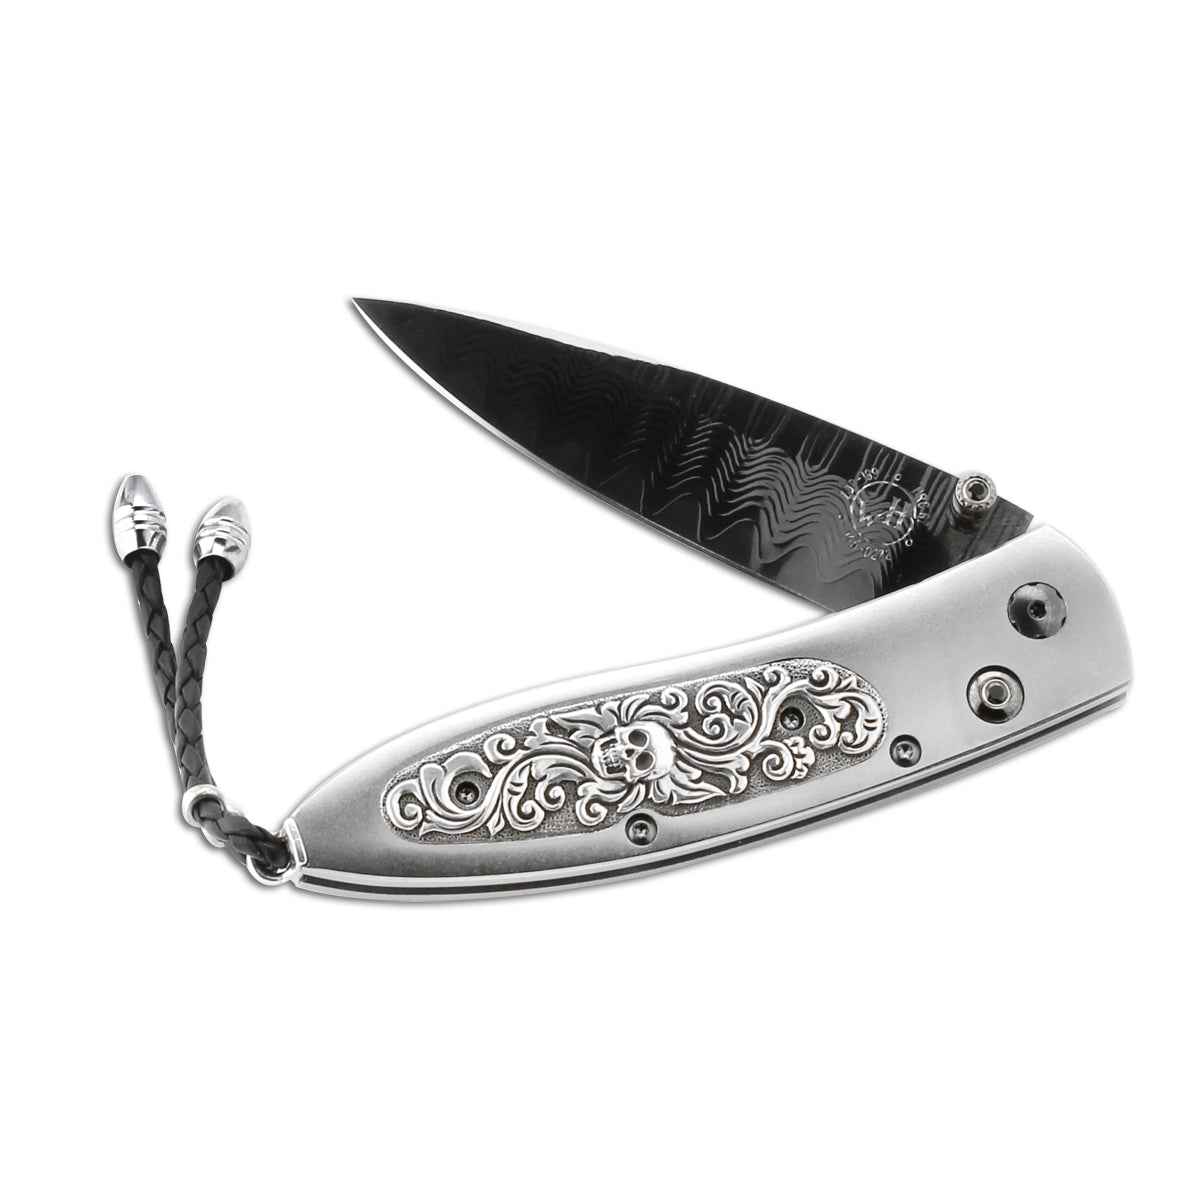 Monarch 'Tomb' Knife 347815